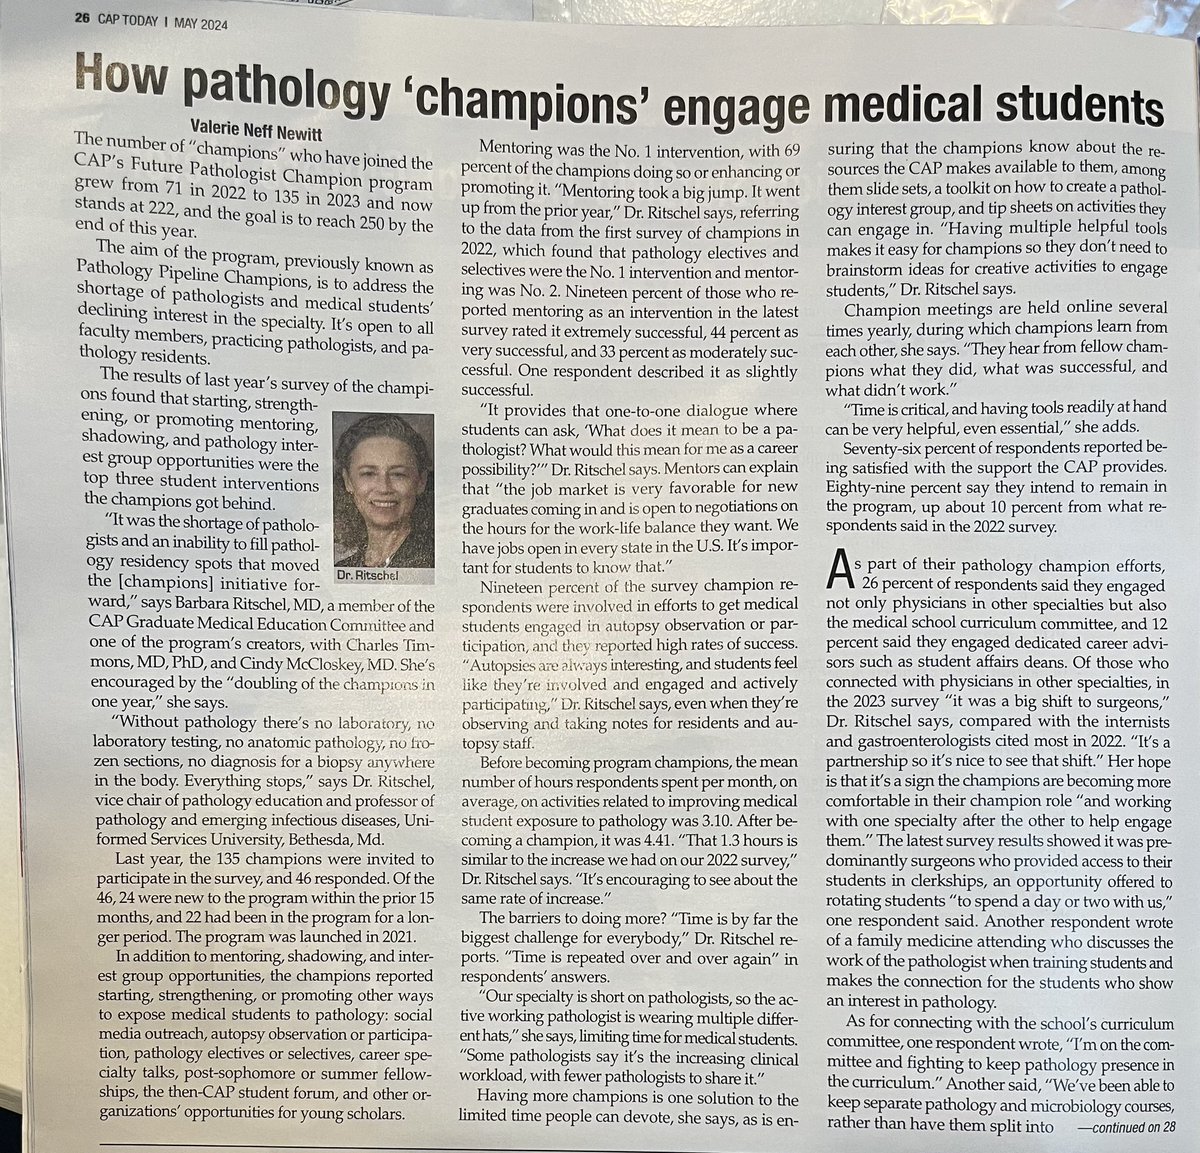 Very inspiring article @Pathologists CAP TODAY about #pathologychampions Mentor. Coach. Inspire. Engage. Lead. Serve. Go the extra mile. Students of today and tomorrow need us. Join here: cap.org/member-resourc… #PathX #pathologist #medstudent